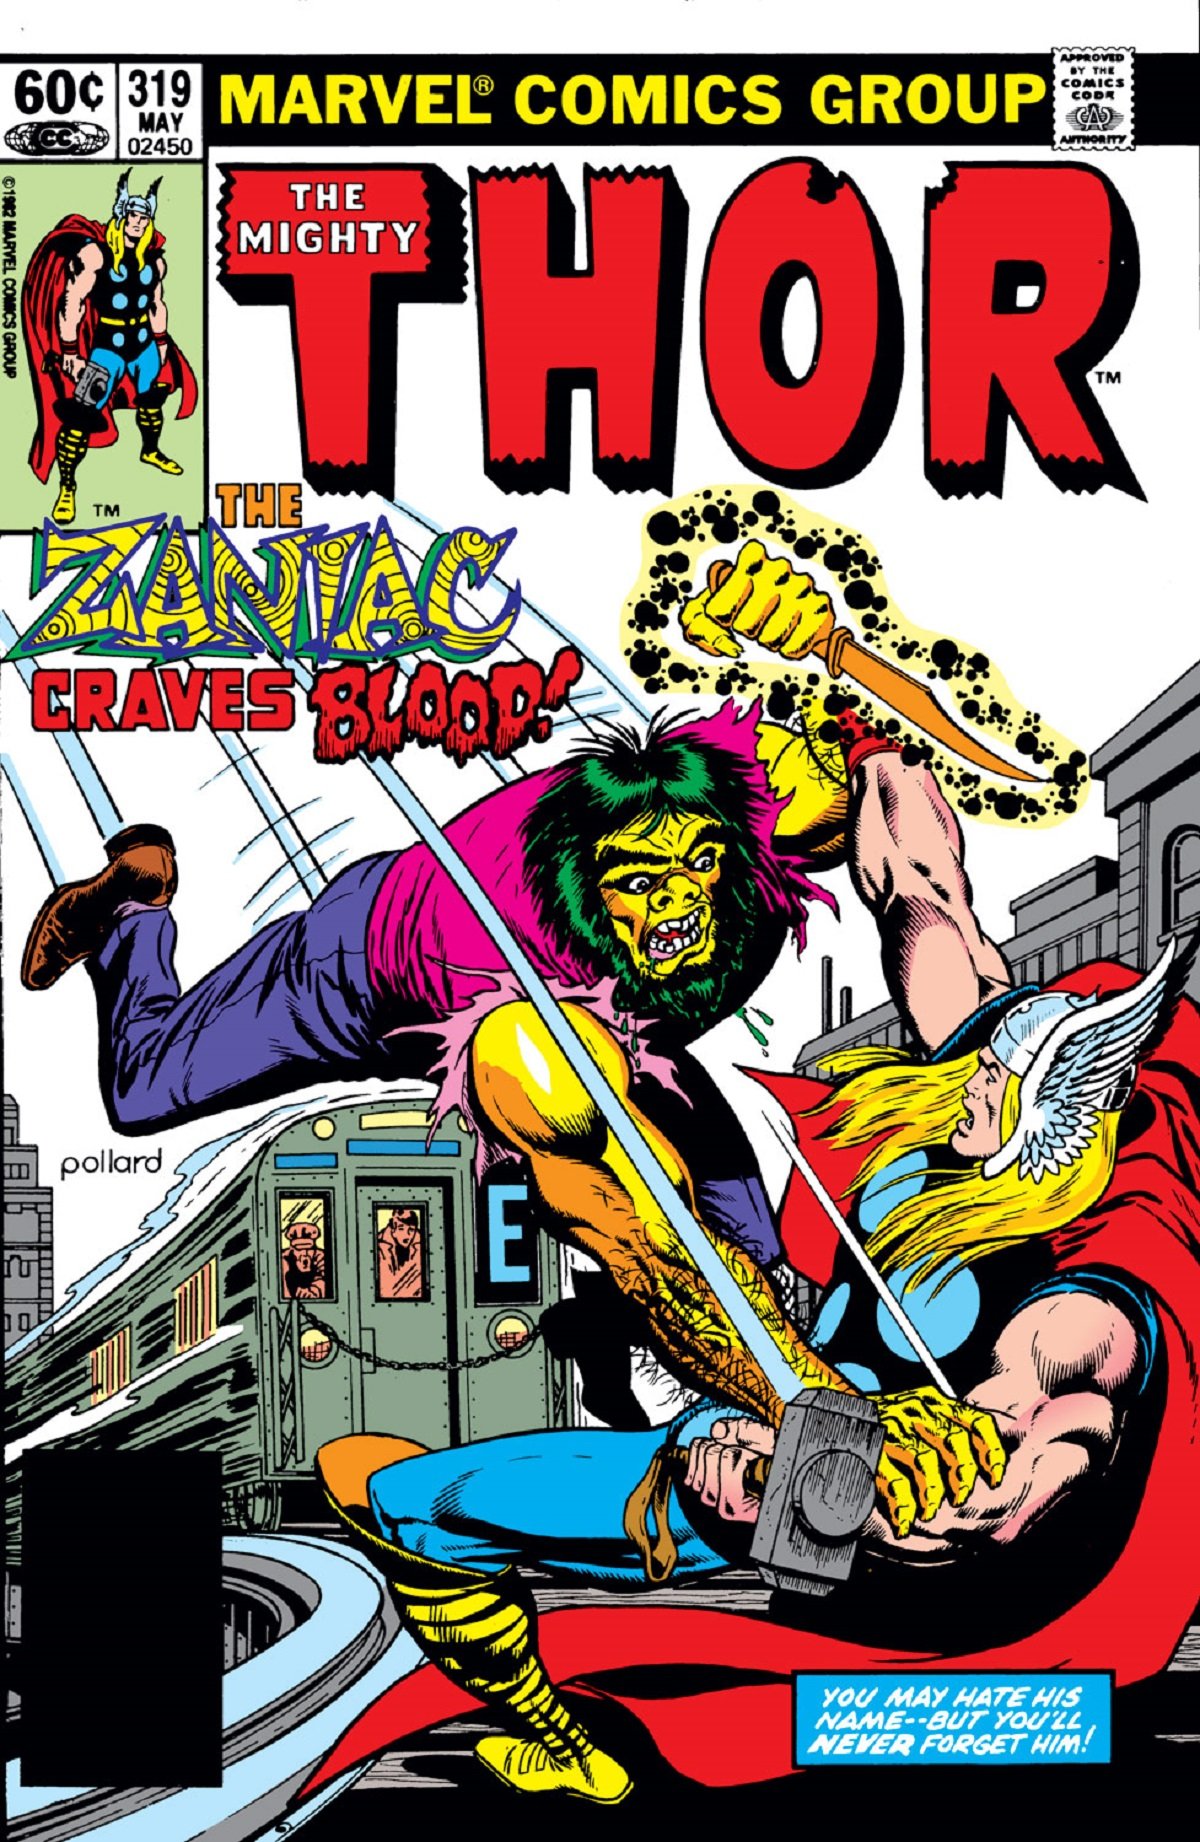 The cover for Thor #319, the first appearance of Zaniac, from 1982.